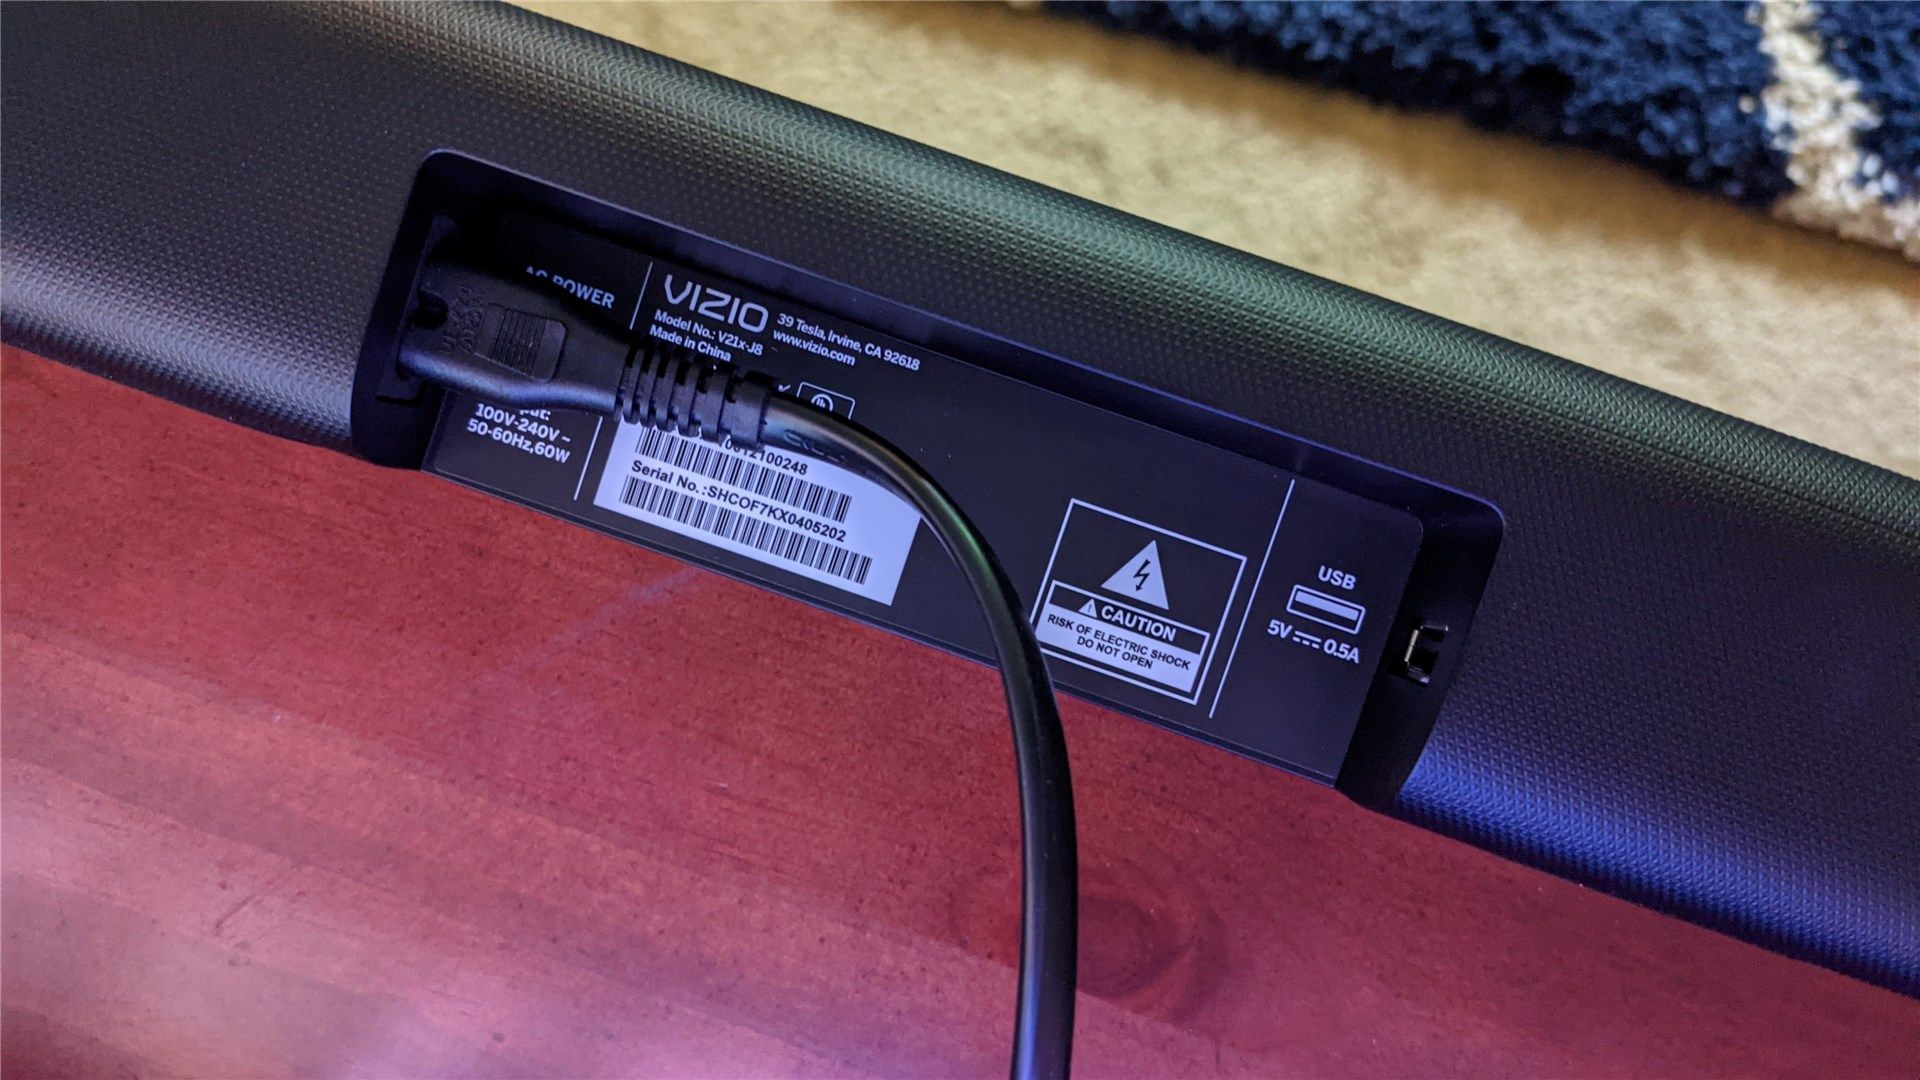 The back of the V-Series soundbar showing the power and USB connections